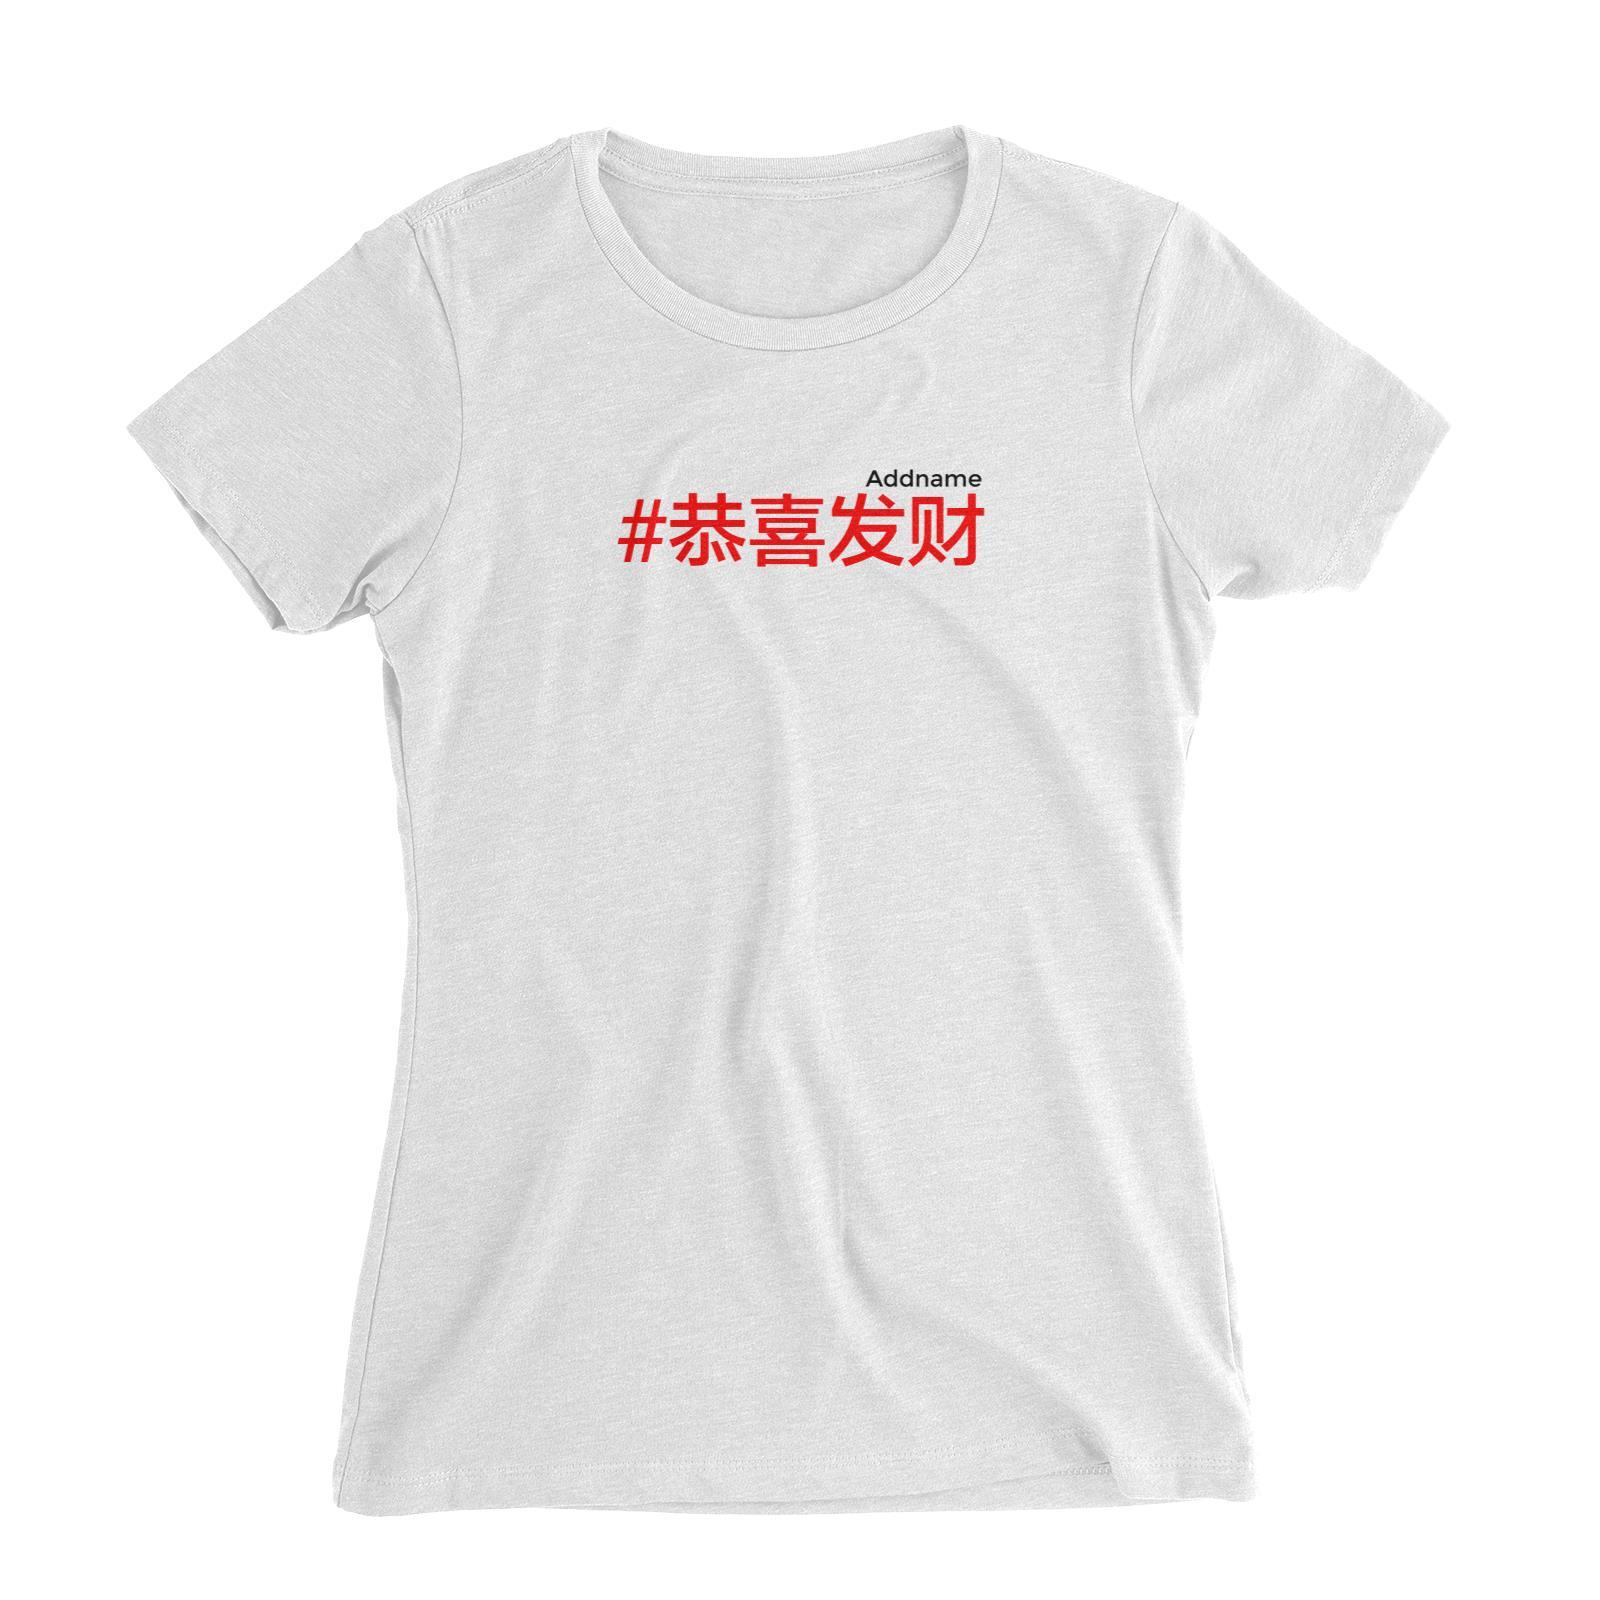 Chinese New Year Hashtag Gong Xi Fa Cai Chinese Women's Slim Fit T-Shirt  Personalizable Designs